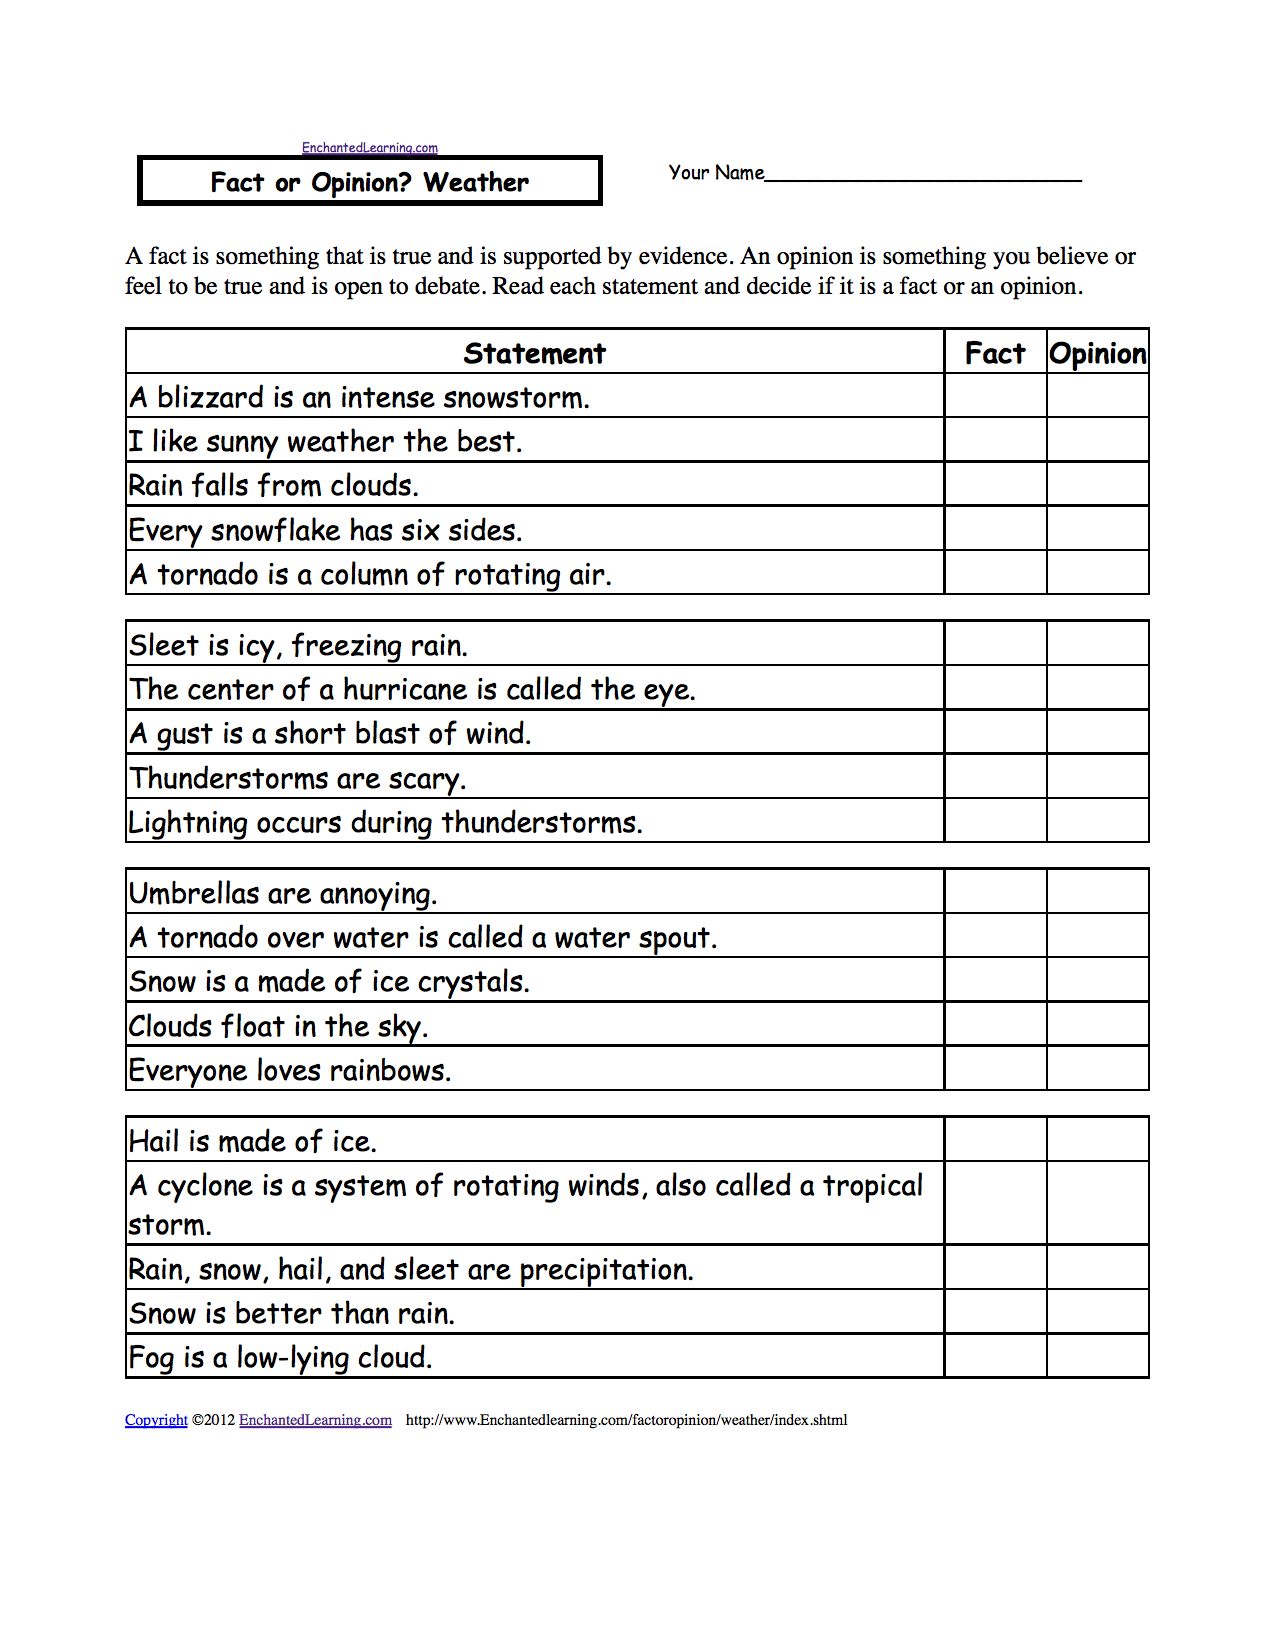 Fact or Opinion? Checkmark Worksheets to Print - EnchantedLearning.com With I Feel Statements Worksheet